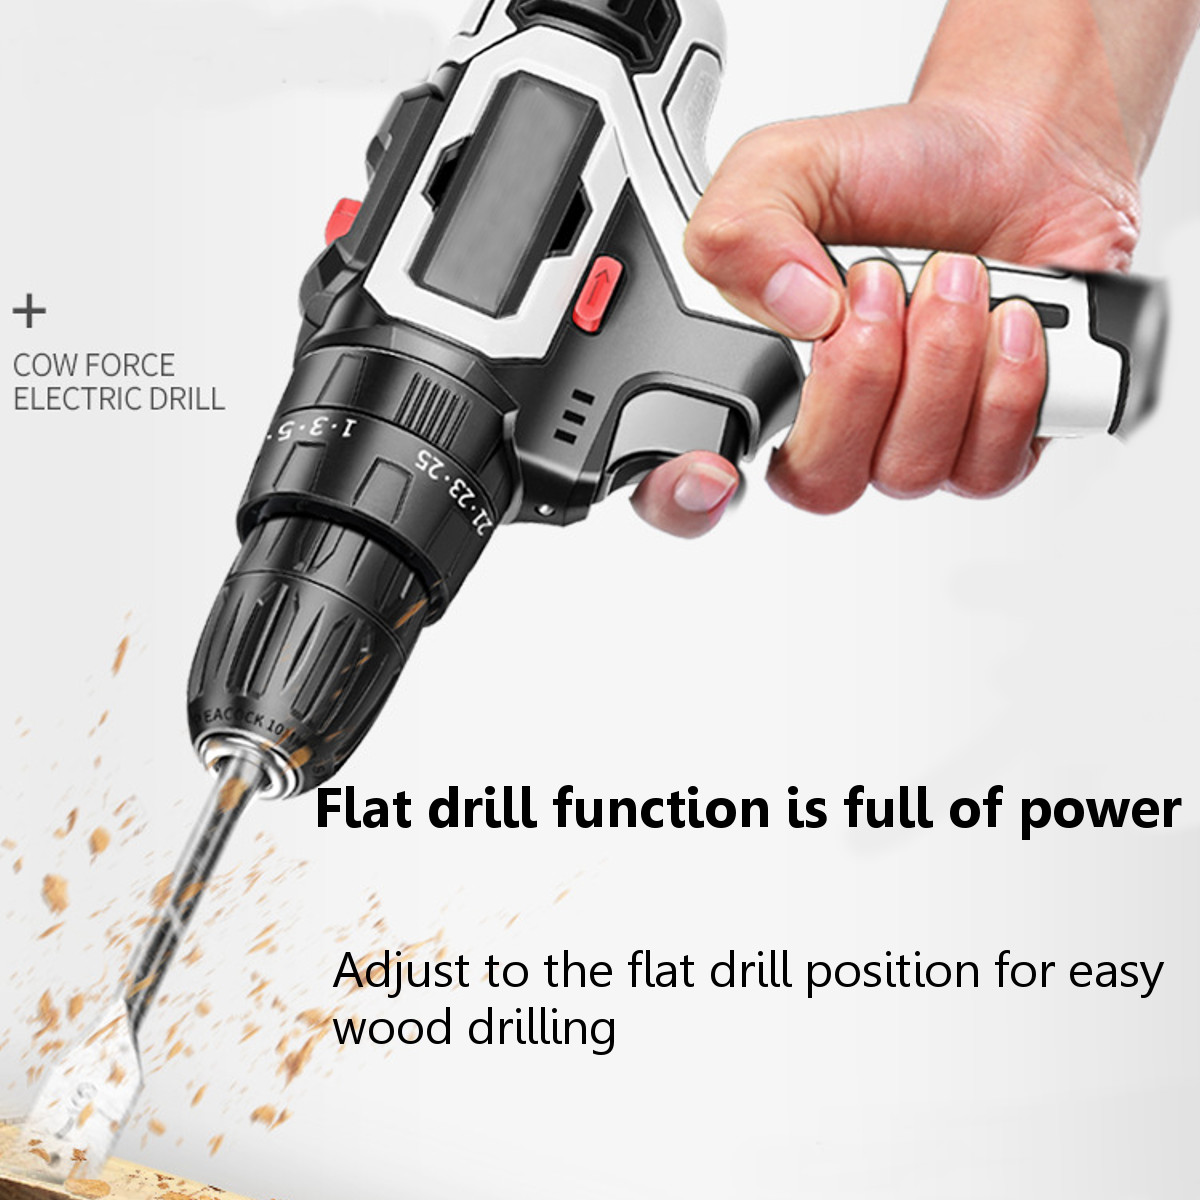 12V-1500mAH-25NM-Rechargeable-Cordless-Drill-2-Speeds-Electric-Screwdriver-Power-Tool-1736770-5